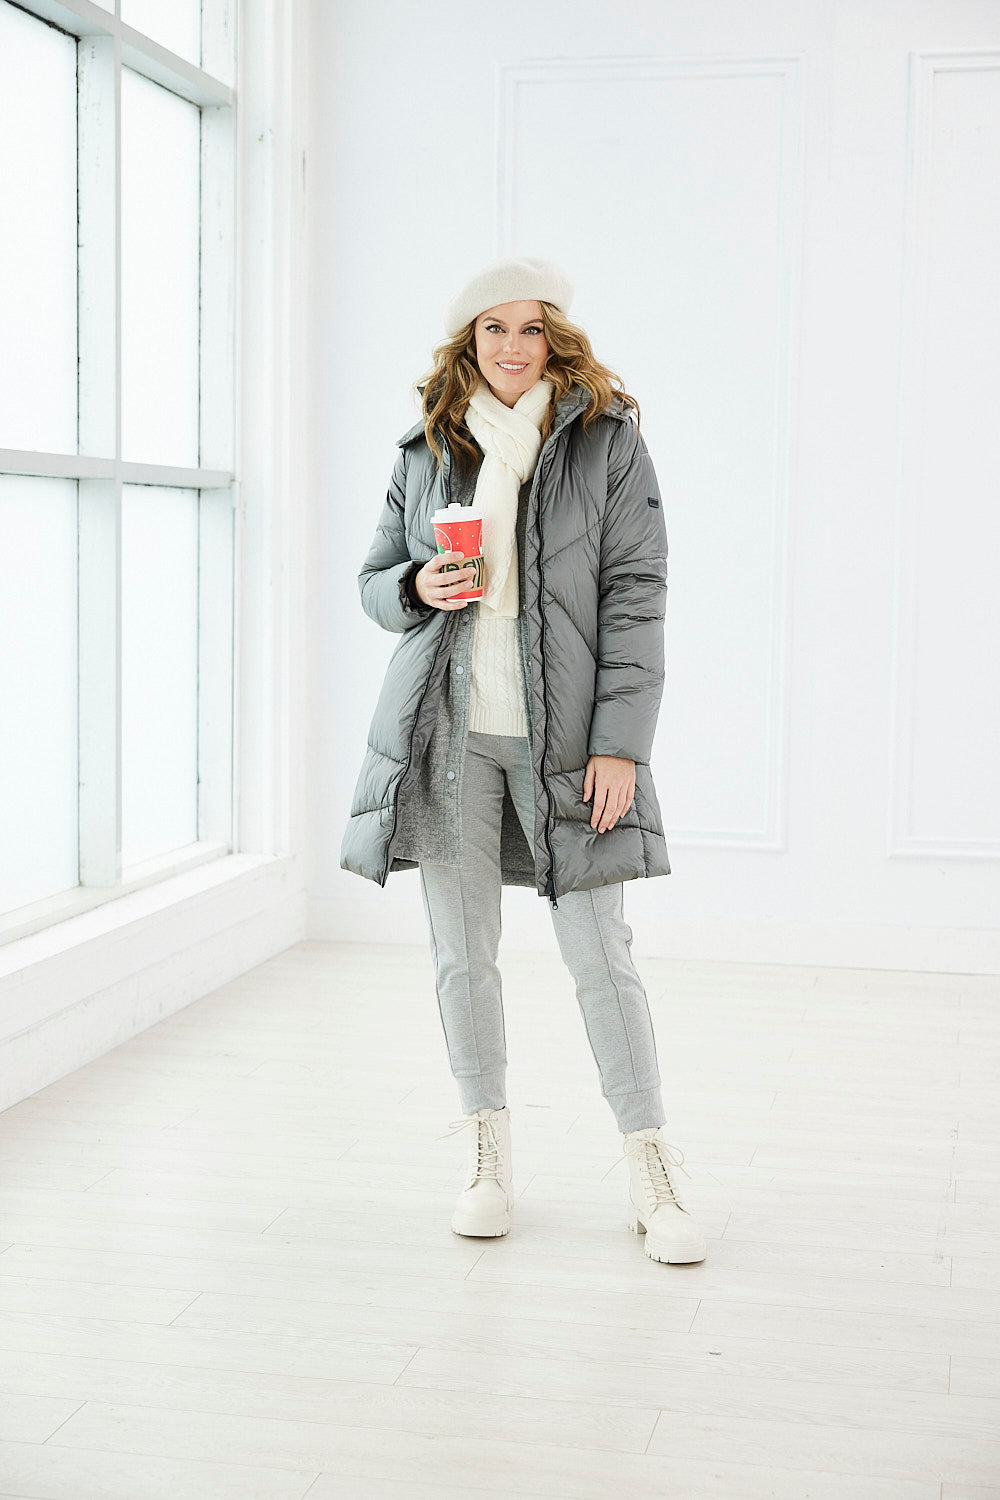 Winter Outfits, Women's Winter Clothes